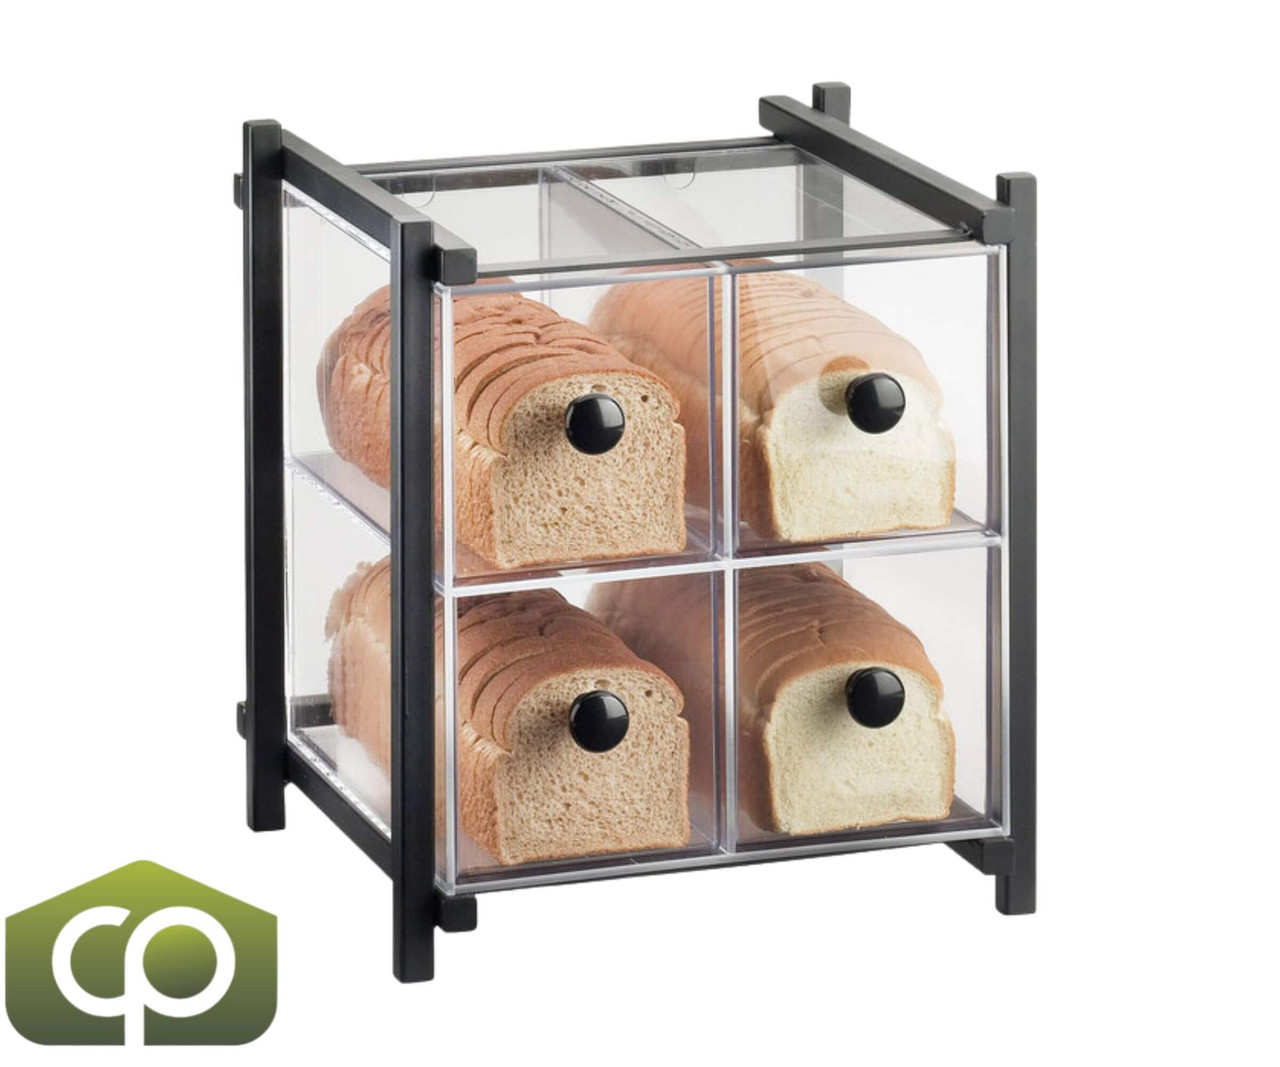 Cal-Mil 14" x 14 3/4" x 15 3/4" One by One Four Drawer Black Bread Display Case-Chicken Pieces